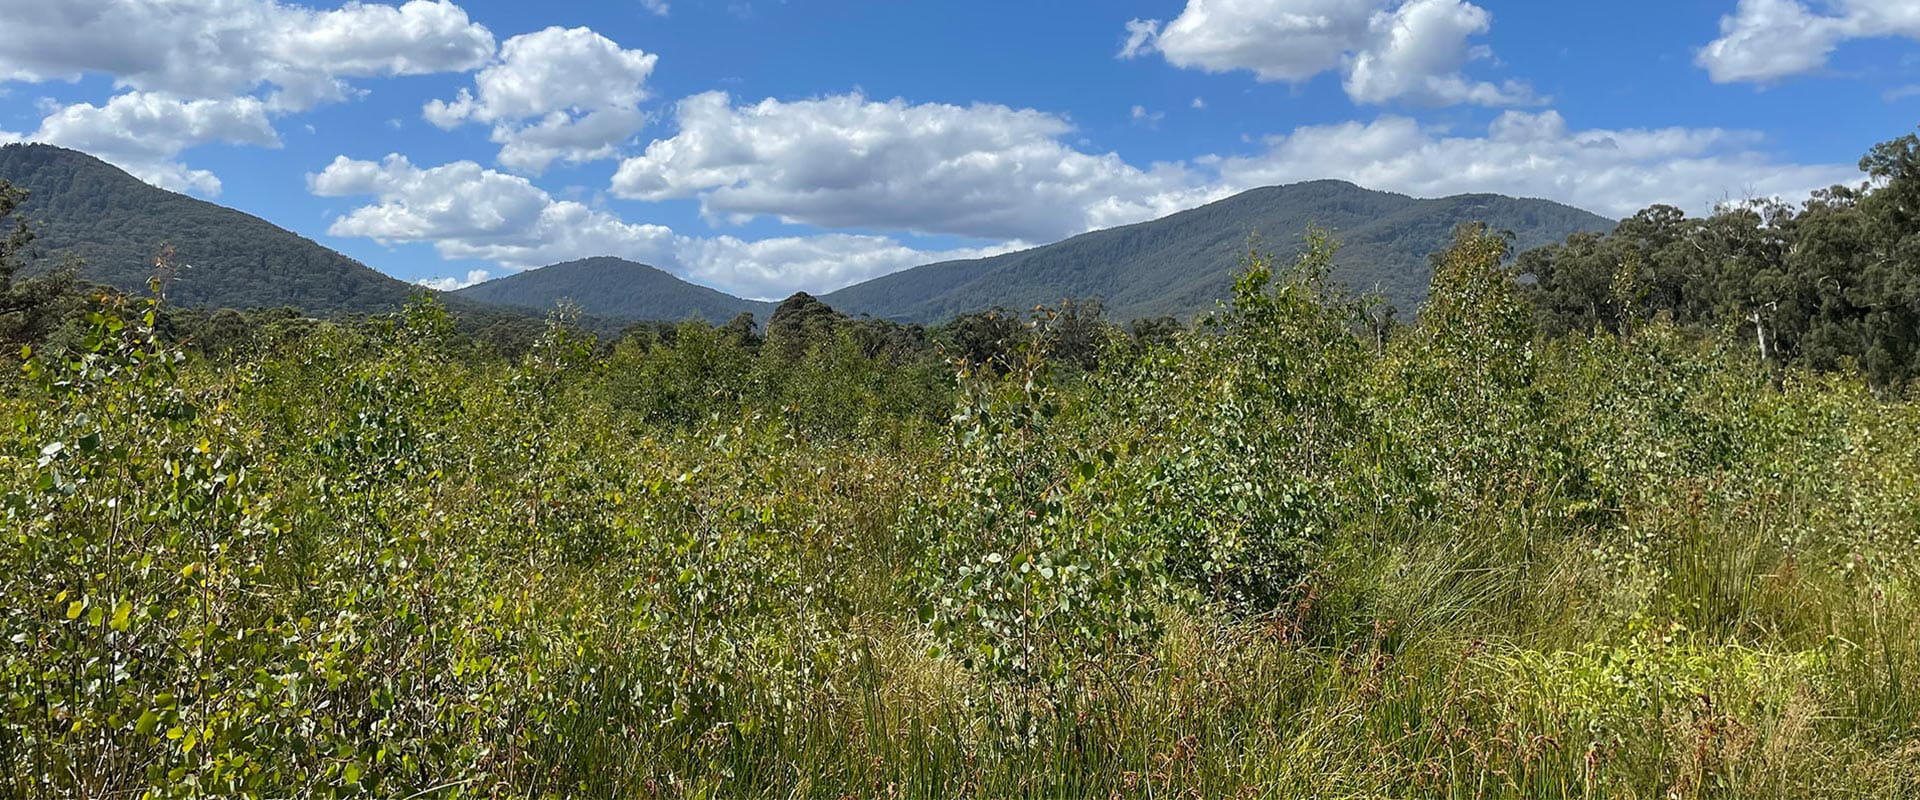 Scrubby green waist high foliage grows around a clearing with tree covered mountain ranges in the distance.